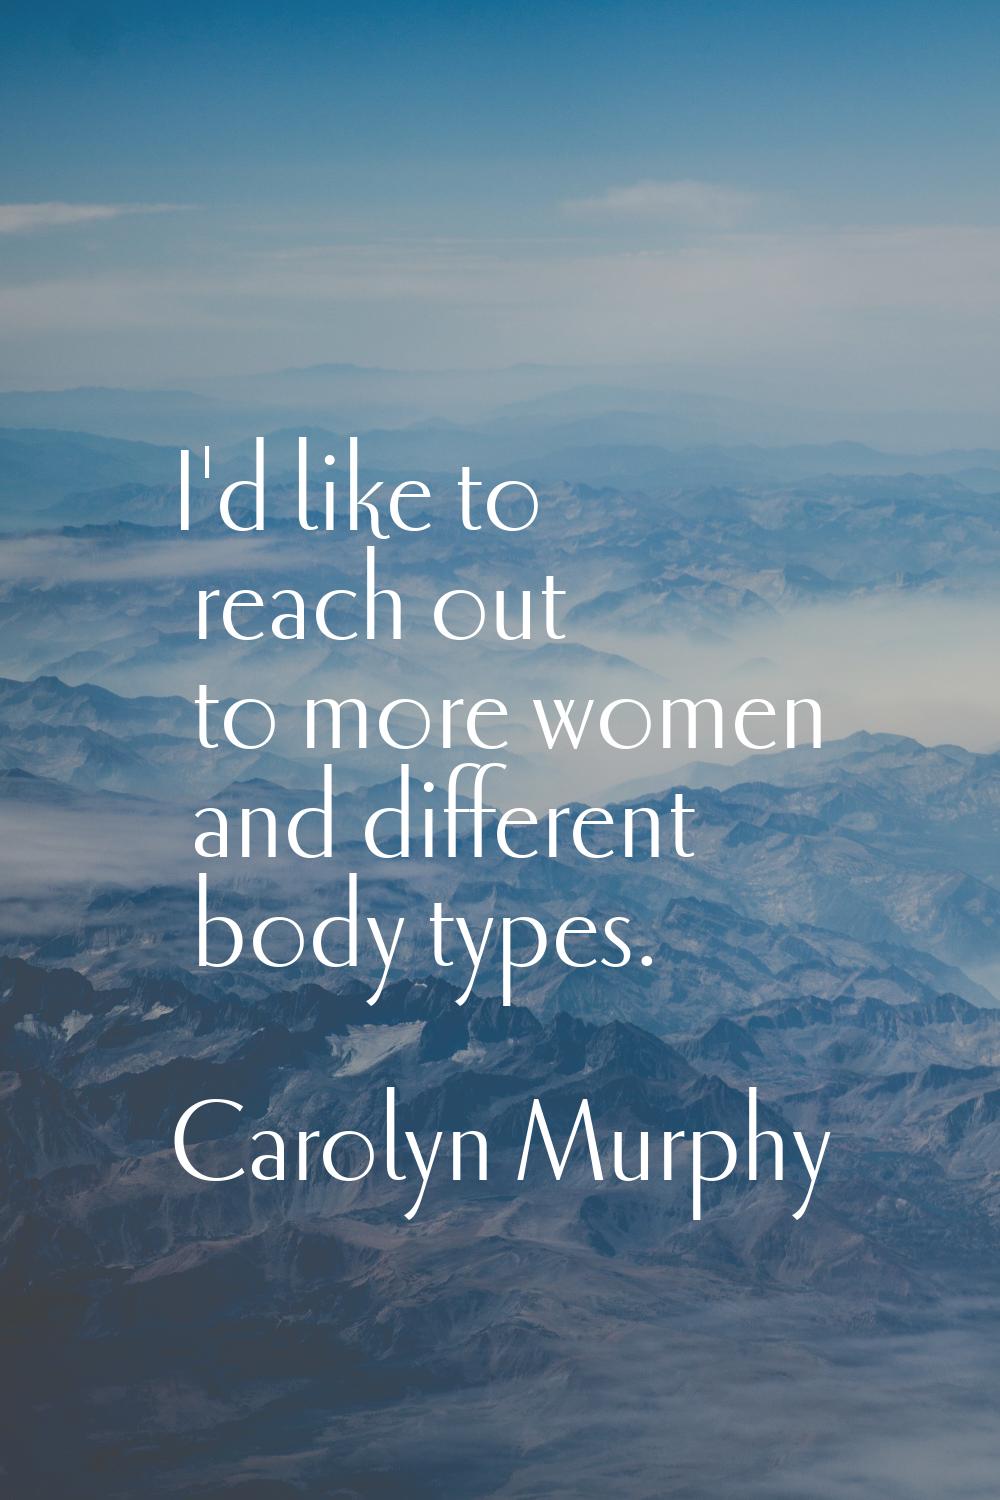 I'd like to reach out to more women and different body types.